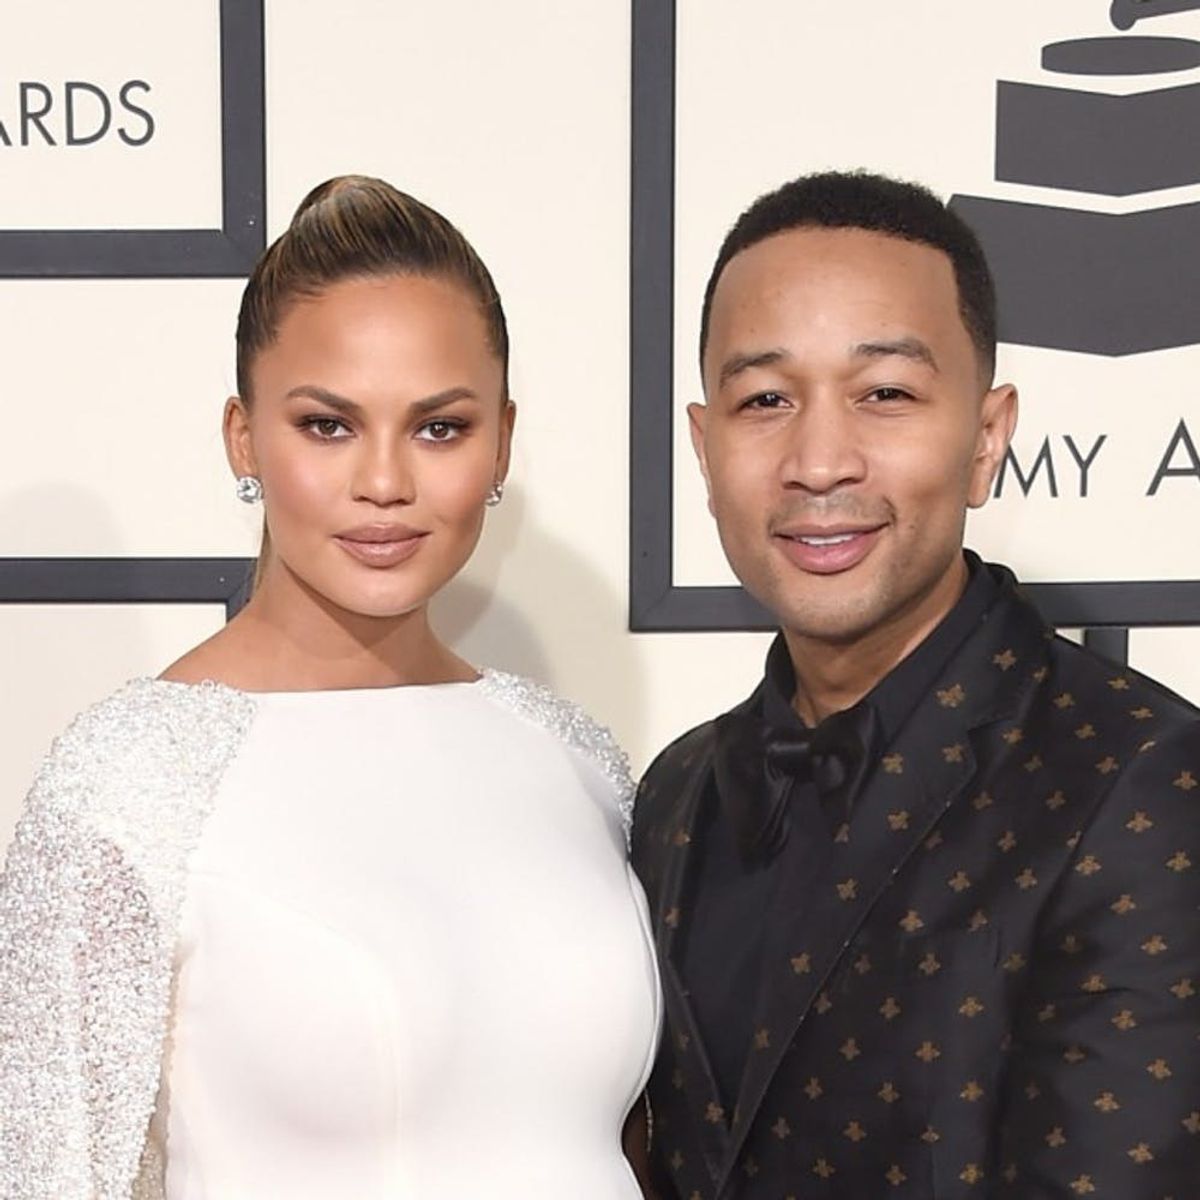 Find Out Who Chrissy Teigen and John Legend’s Baby Girl Looks Like